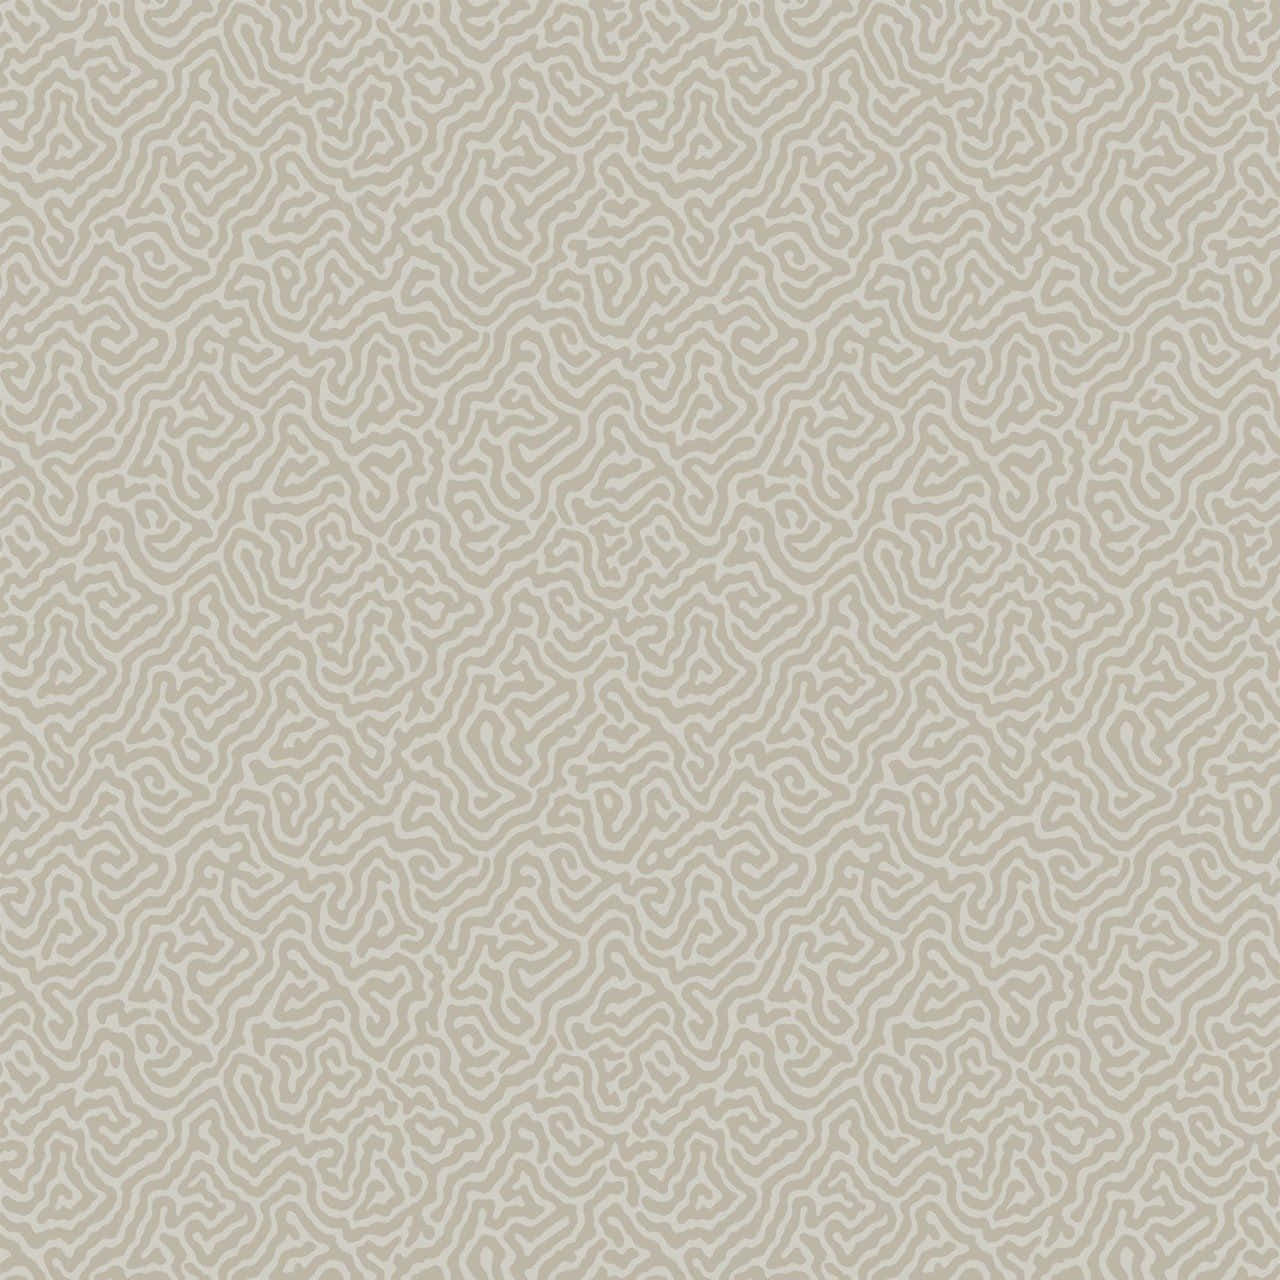 Neutral Colors Background